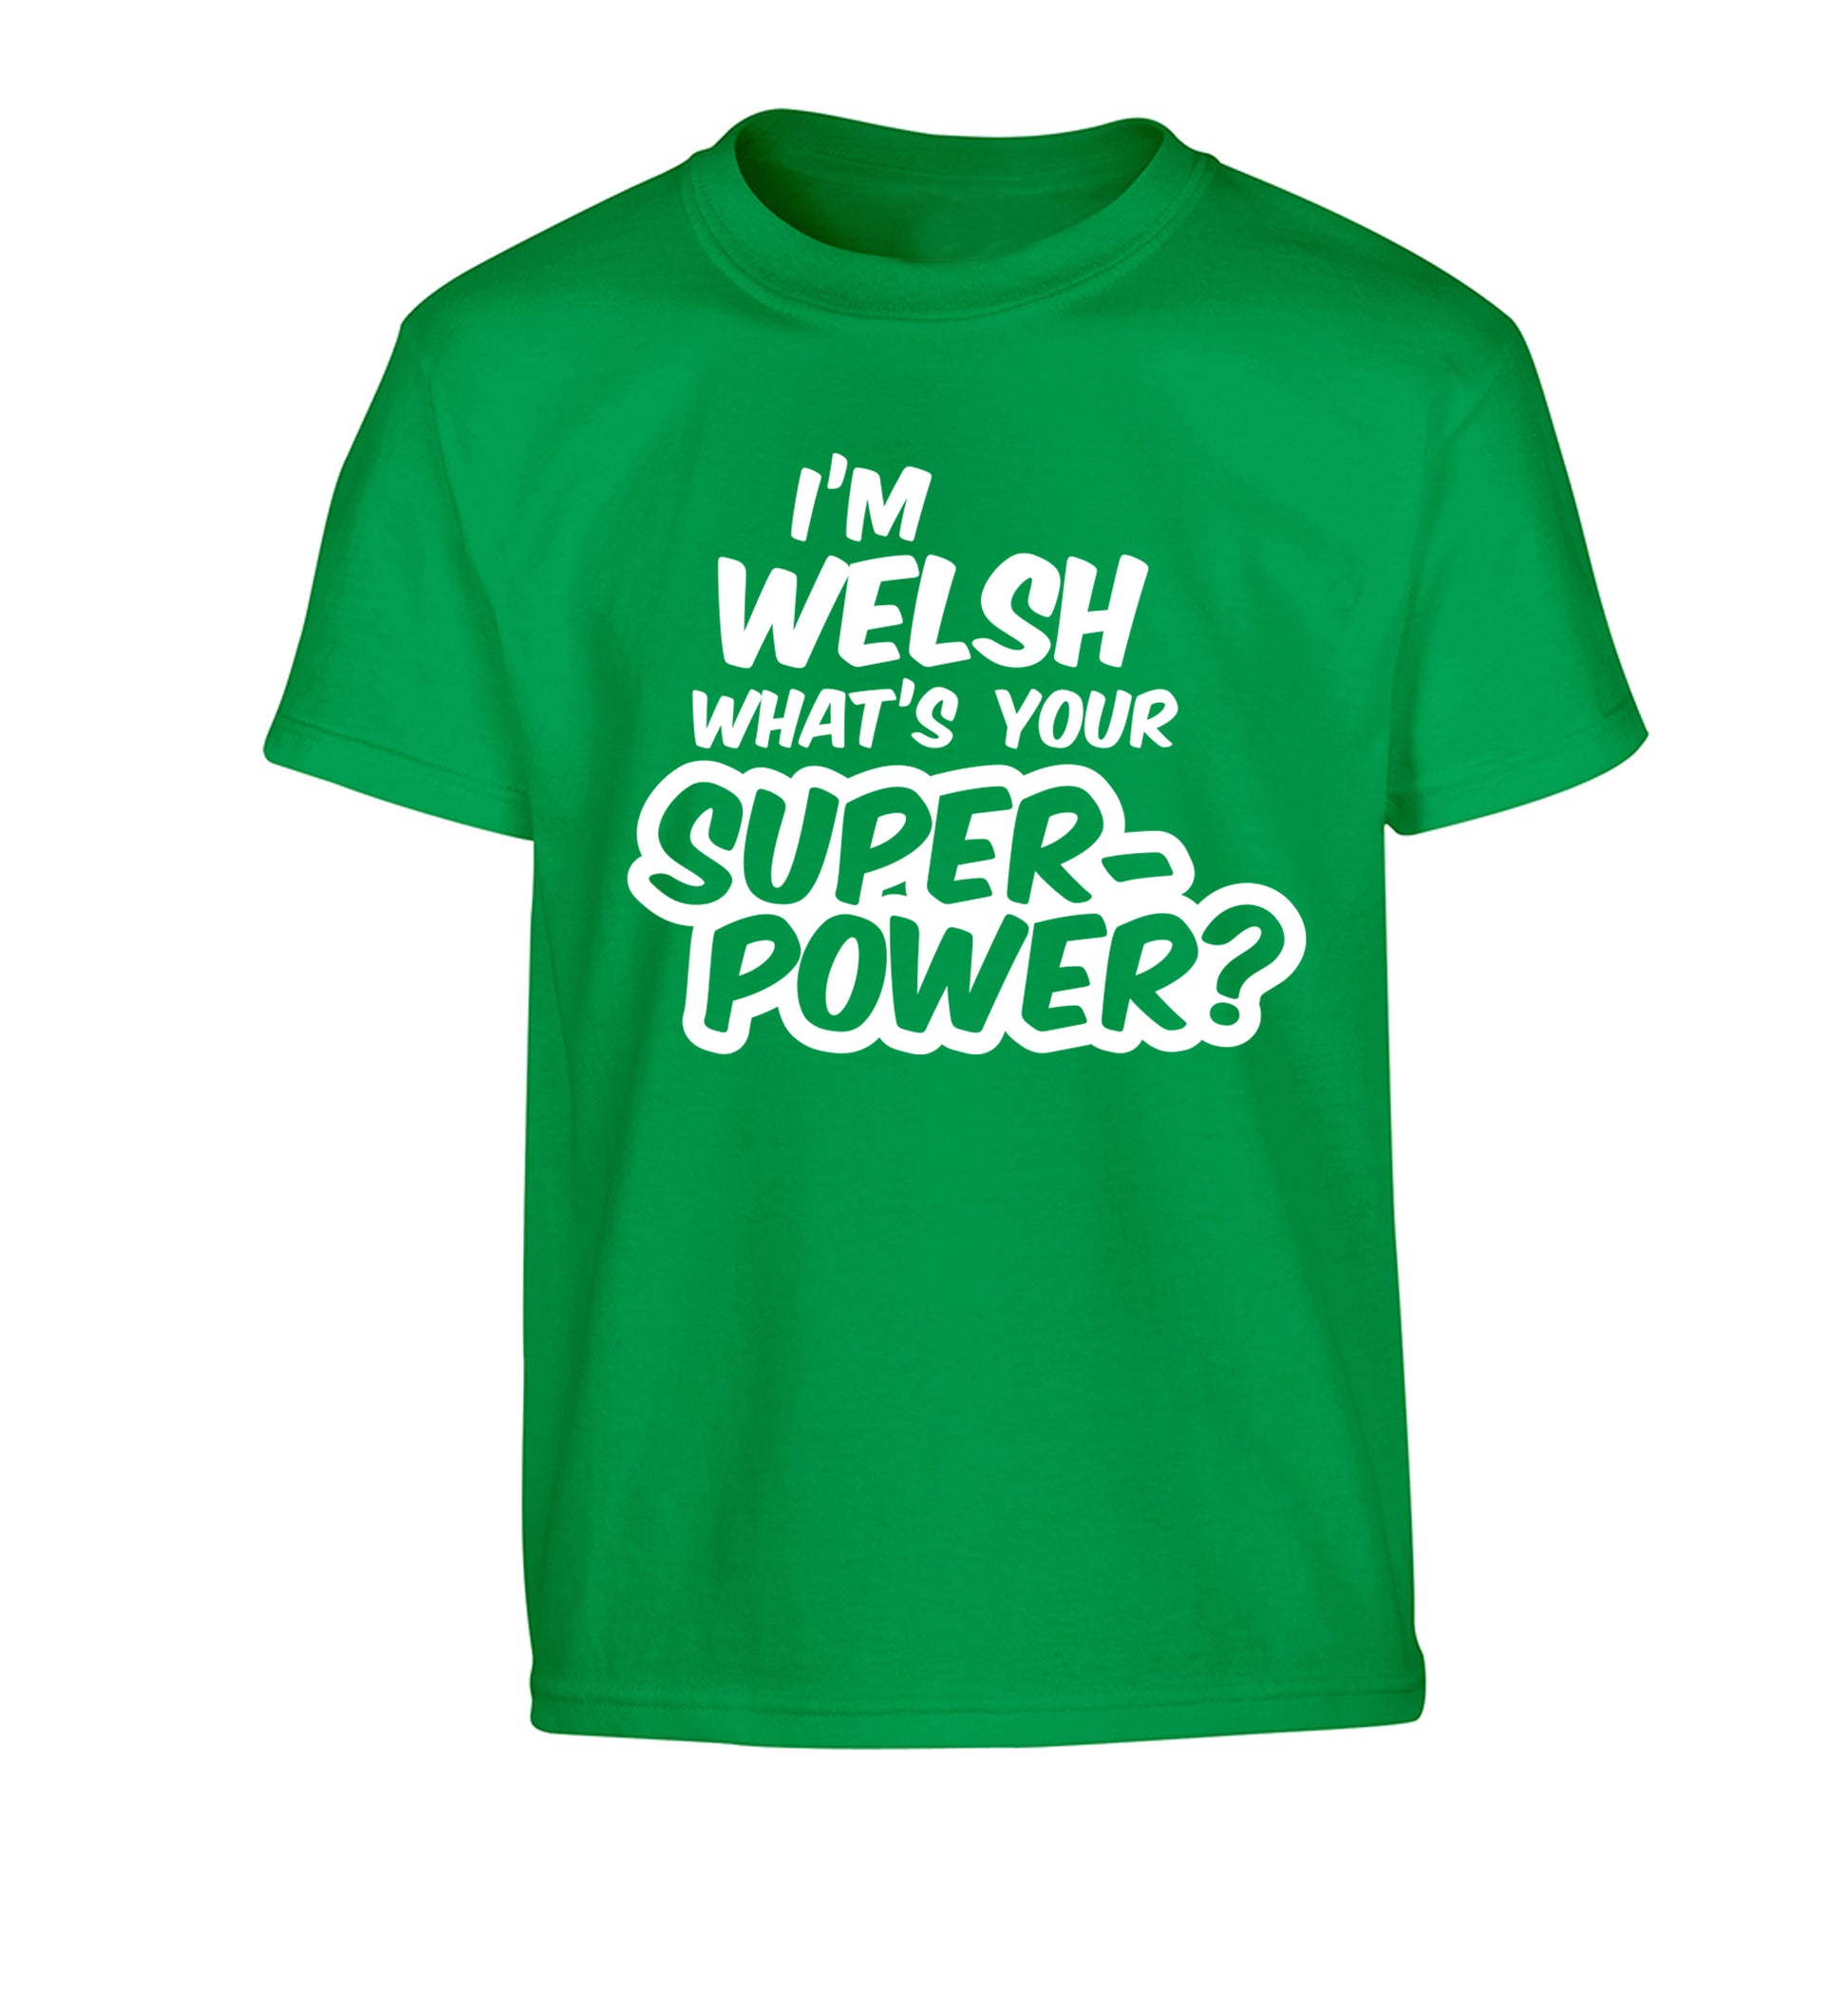 I'm Welsh what's your superpower? Children's green Tshirt 12-13 Years